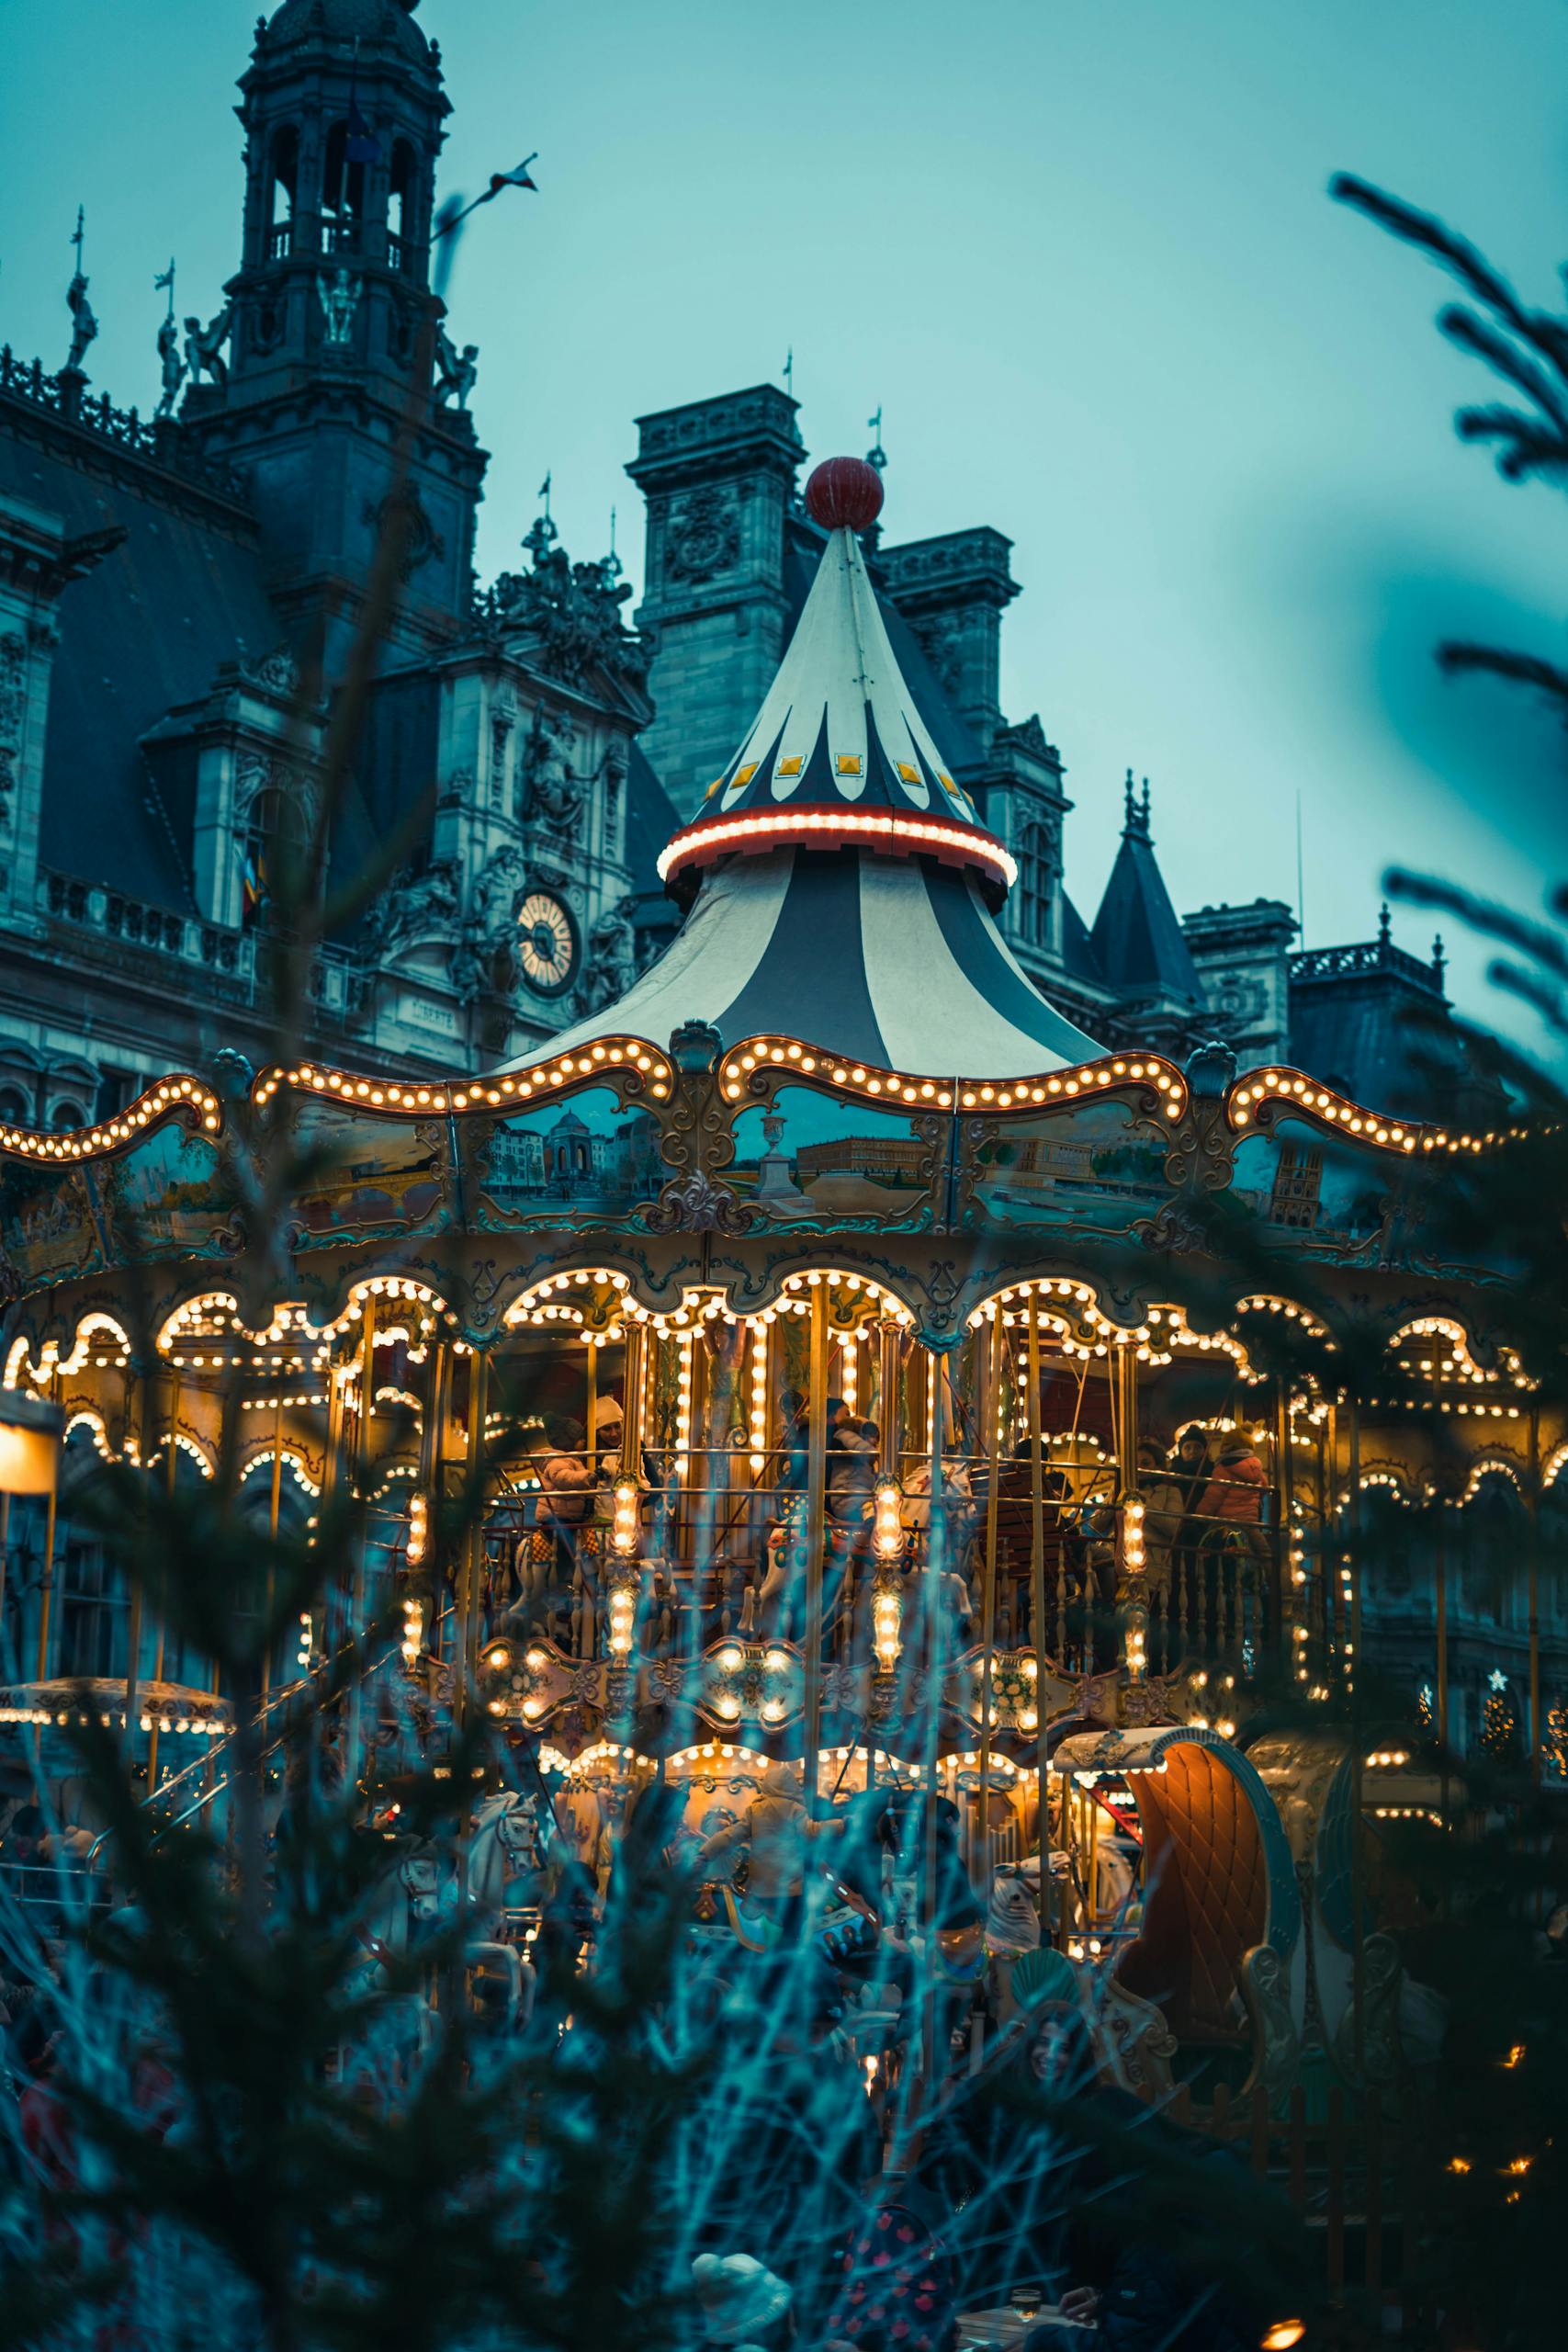 A Christmas Carousel in front of a Building in Marais, Paris, France